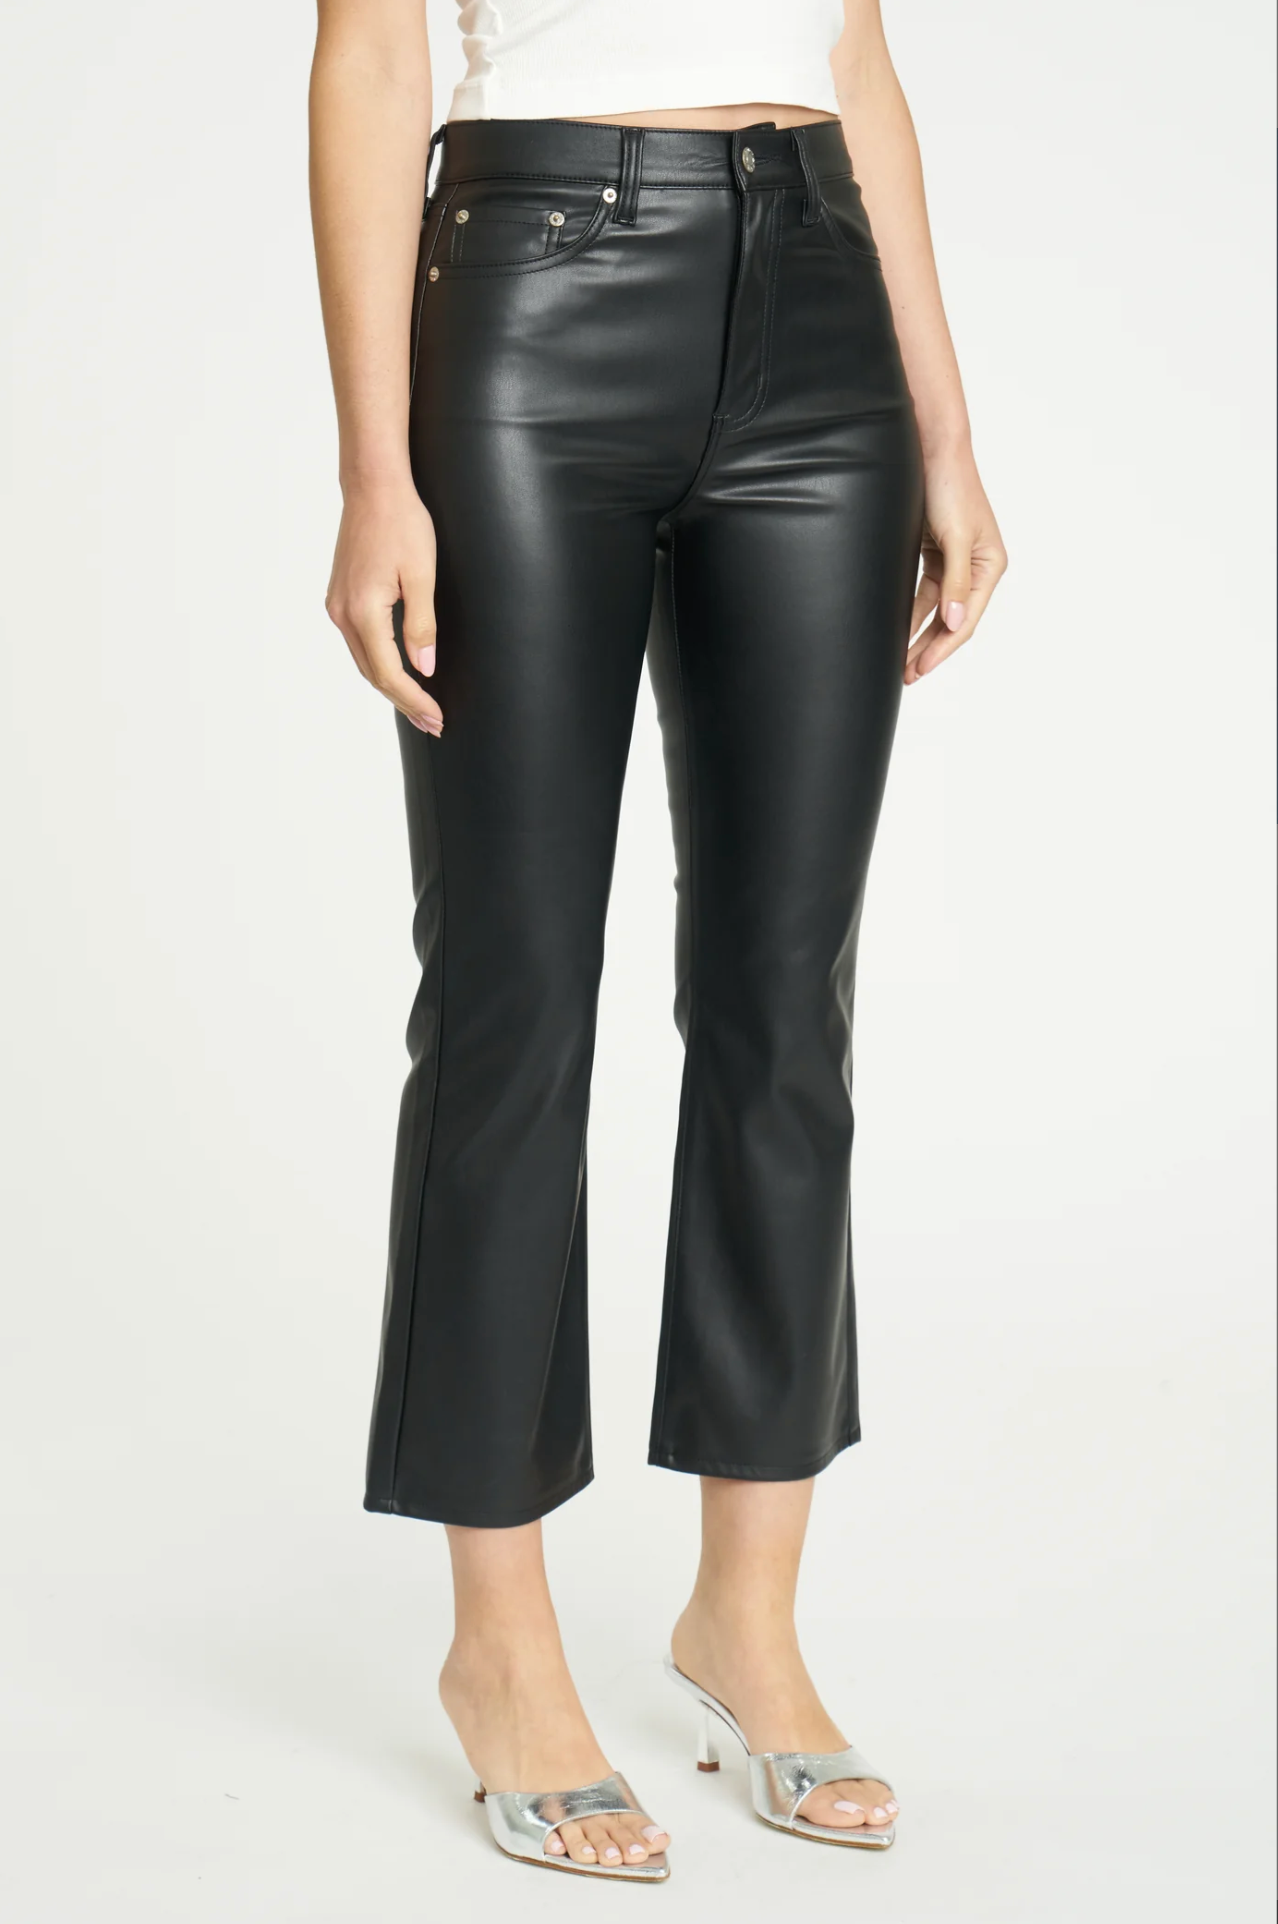 Shy Girl Leather Pant IN CINEMATIC | DAZE